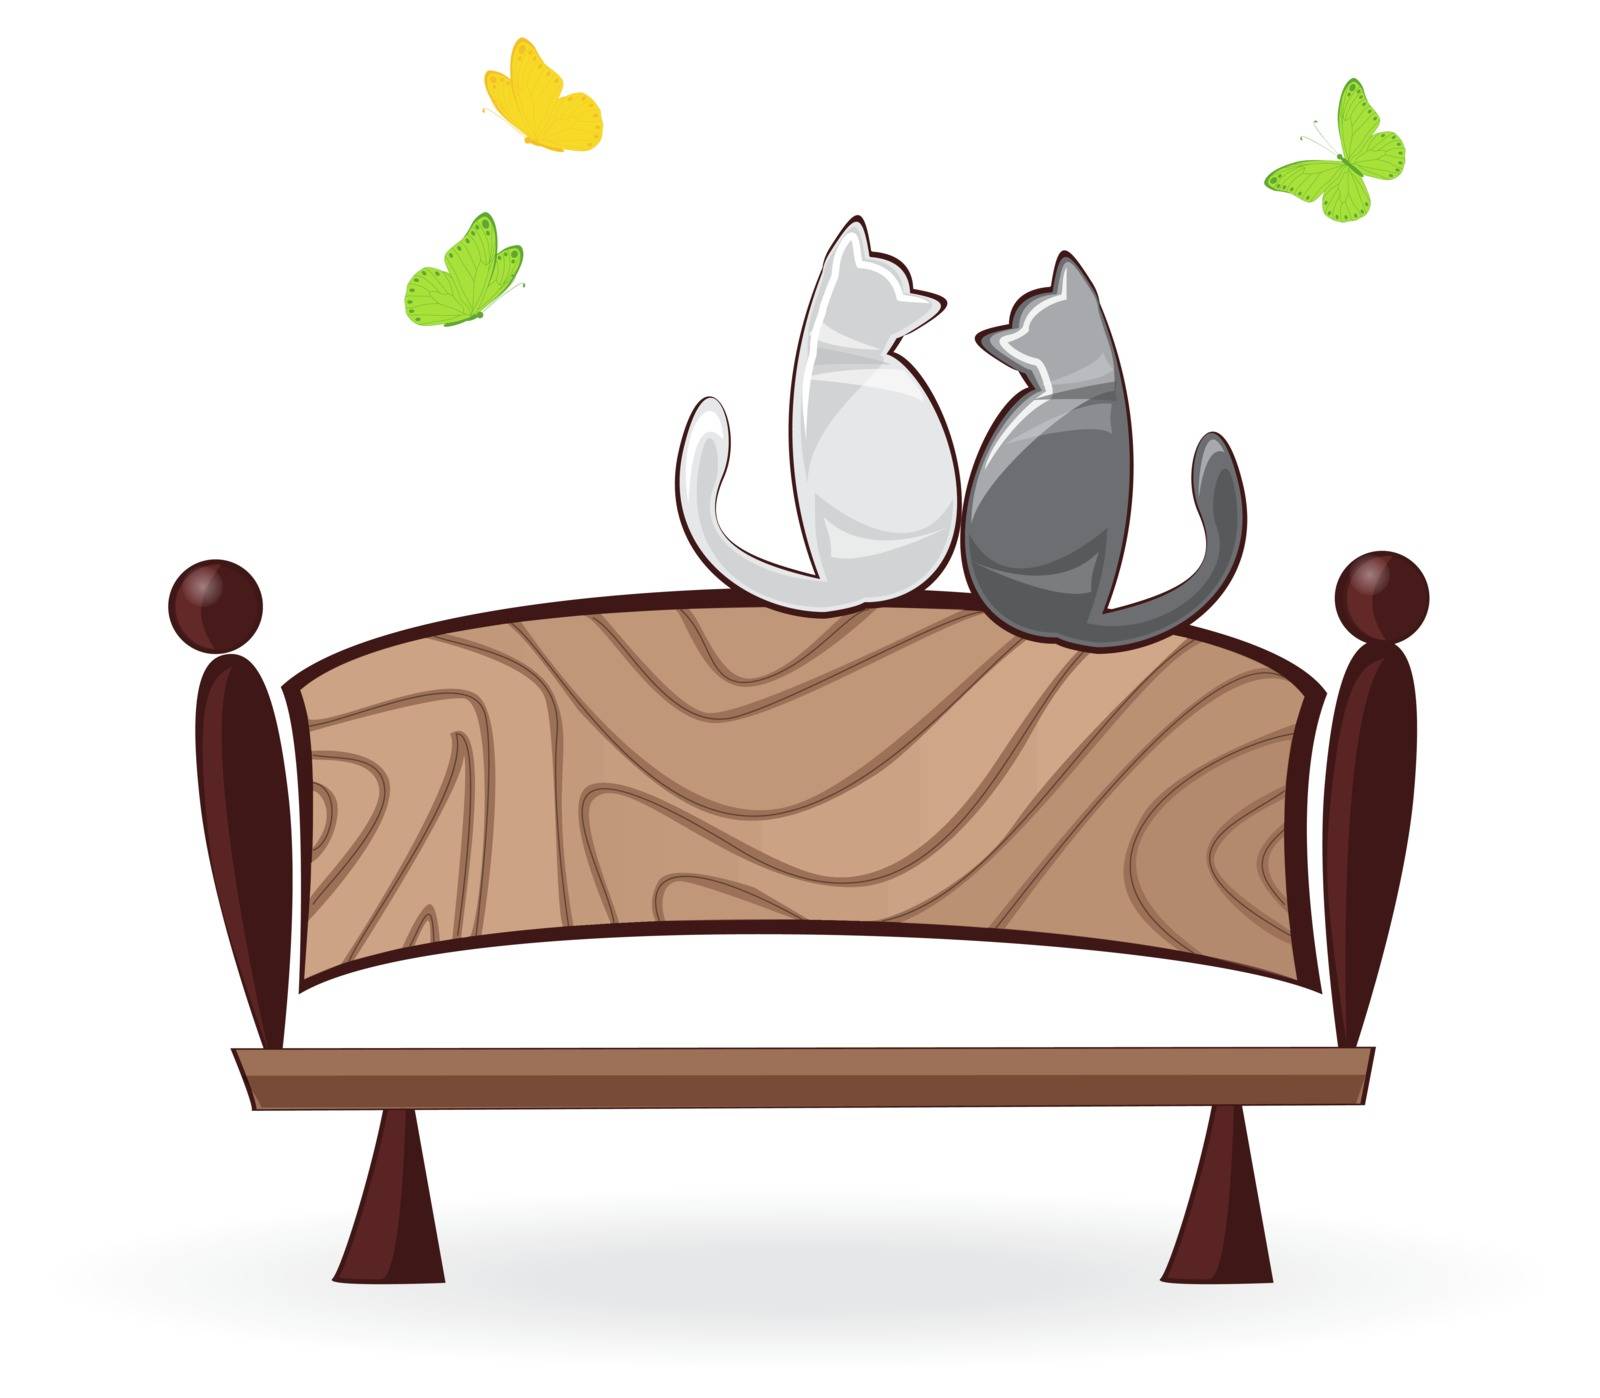 cats sit on a bench and look at butterflies